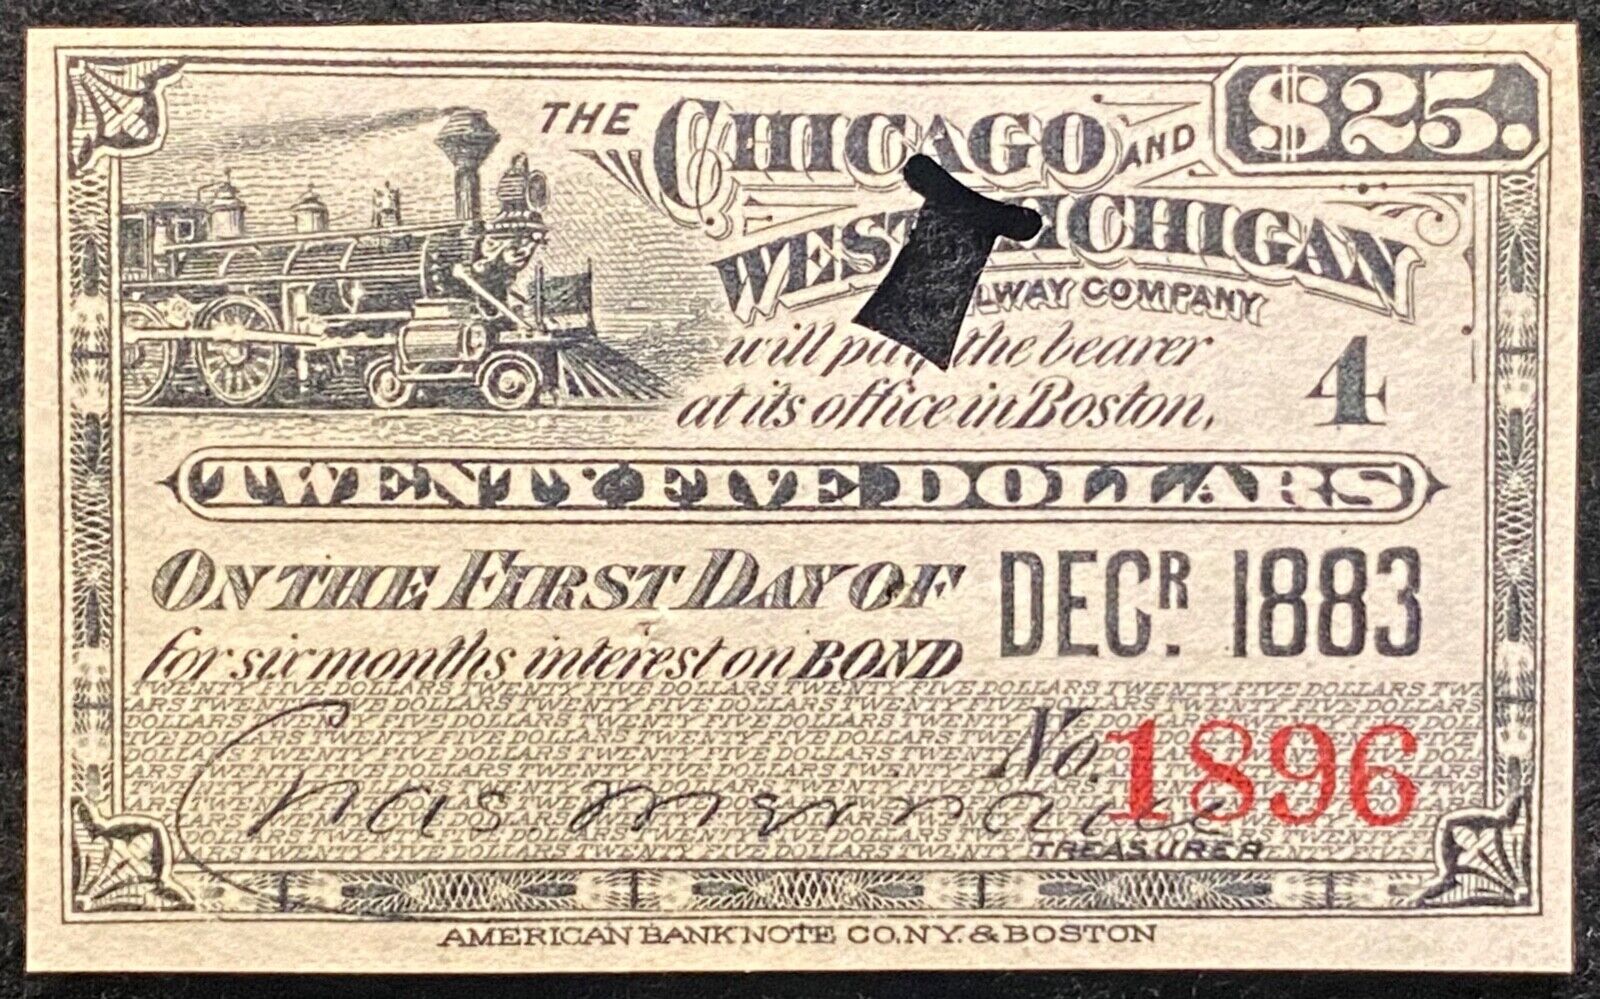 1883 ***THE CHICAGO WEST MICHIGAN RAILWAY COMPANY*** $25 STOCK INTEREST COUPON